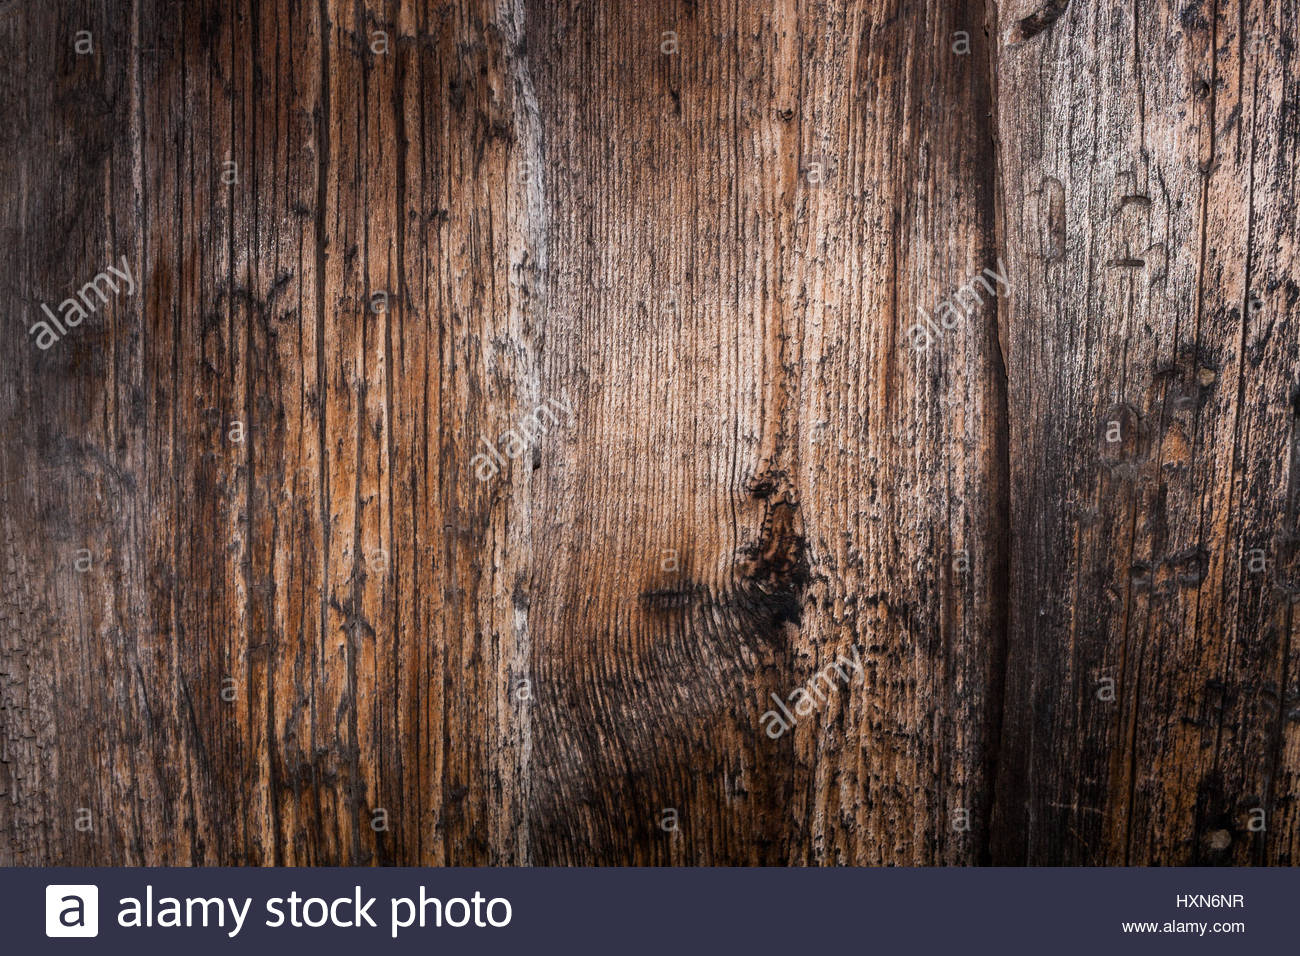 Wooden natural background Wall of old wooden planks Well seen